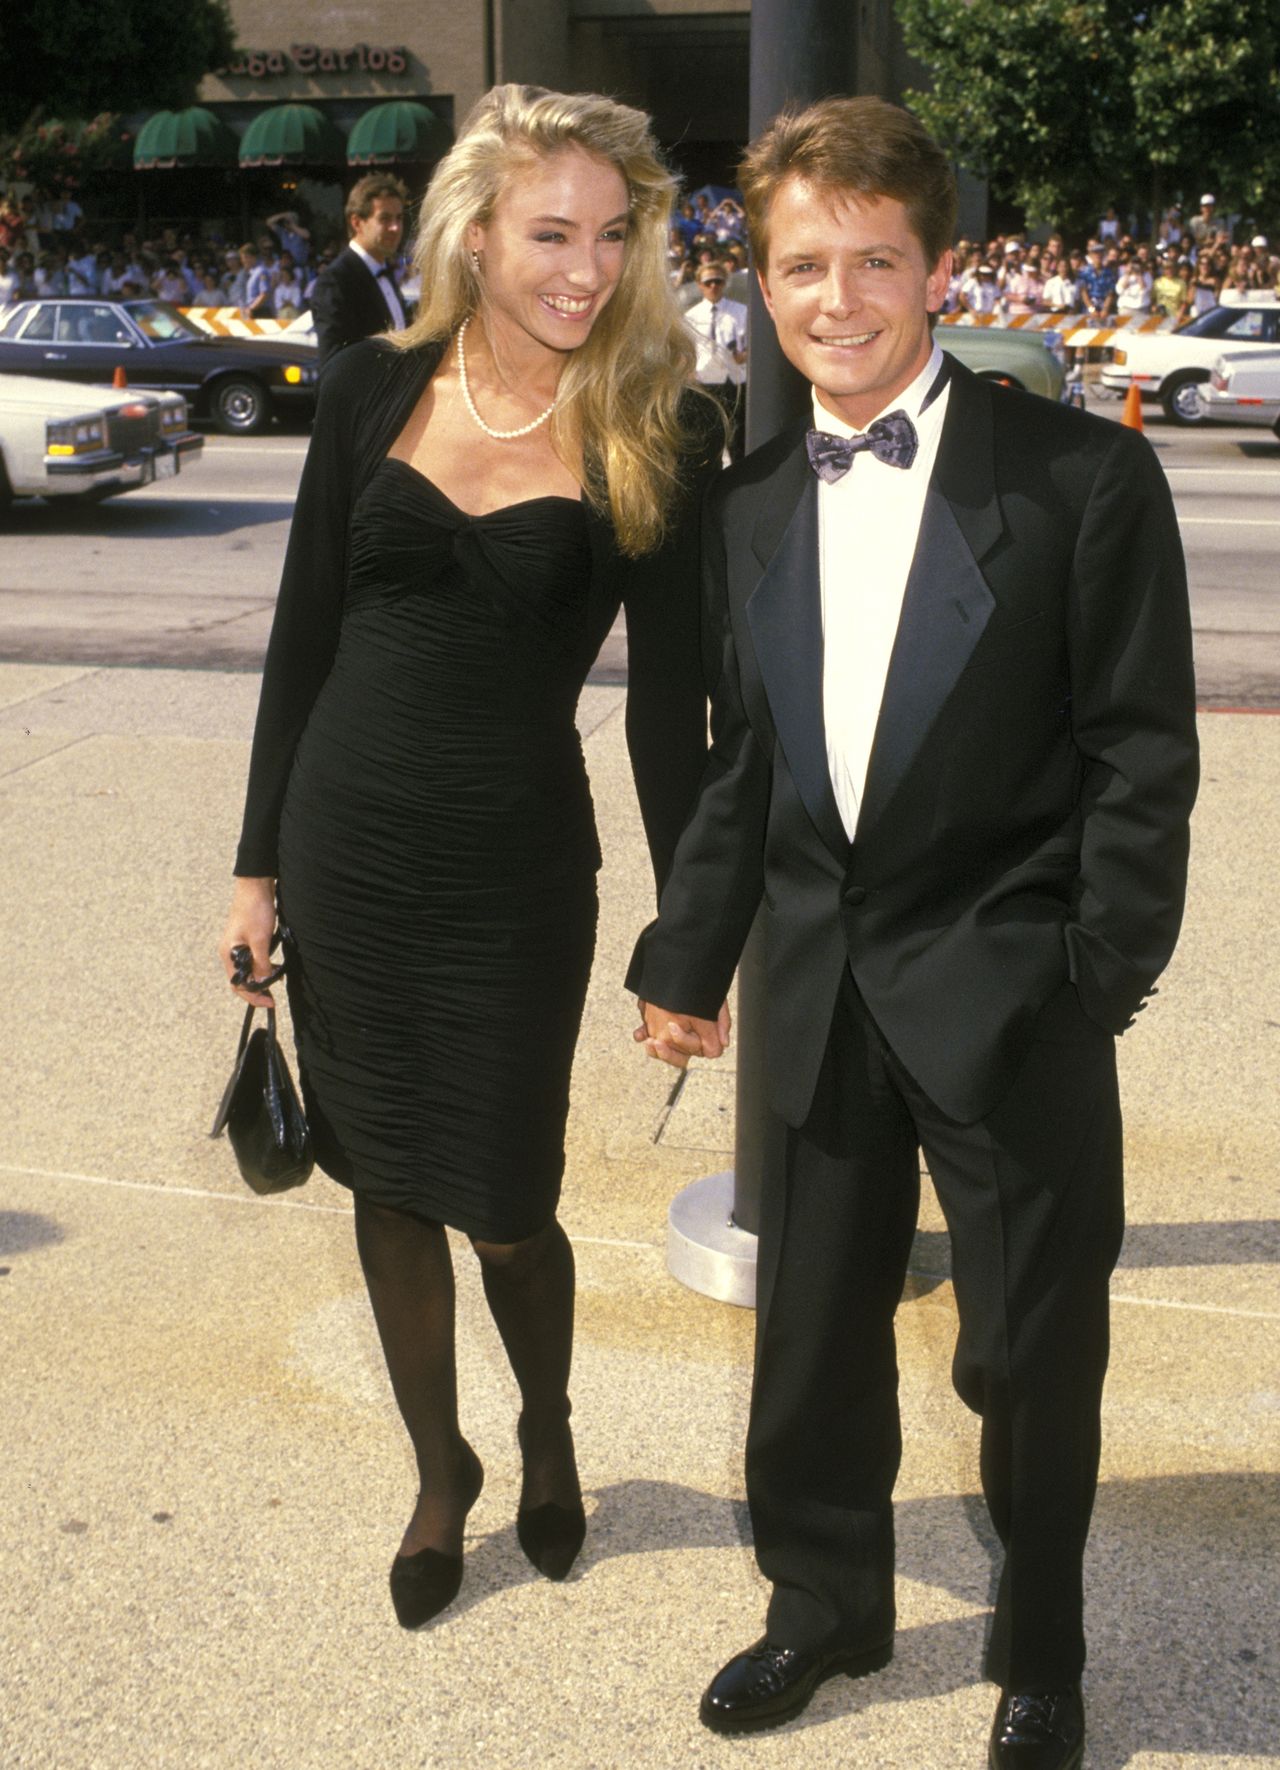 Michael J. Fox and Tracy Pollan at the Emmy Awards ceremony in August 1988.